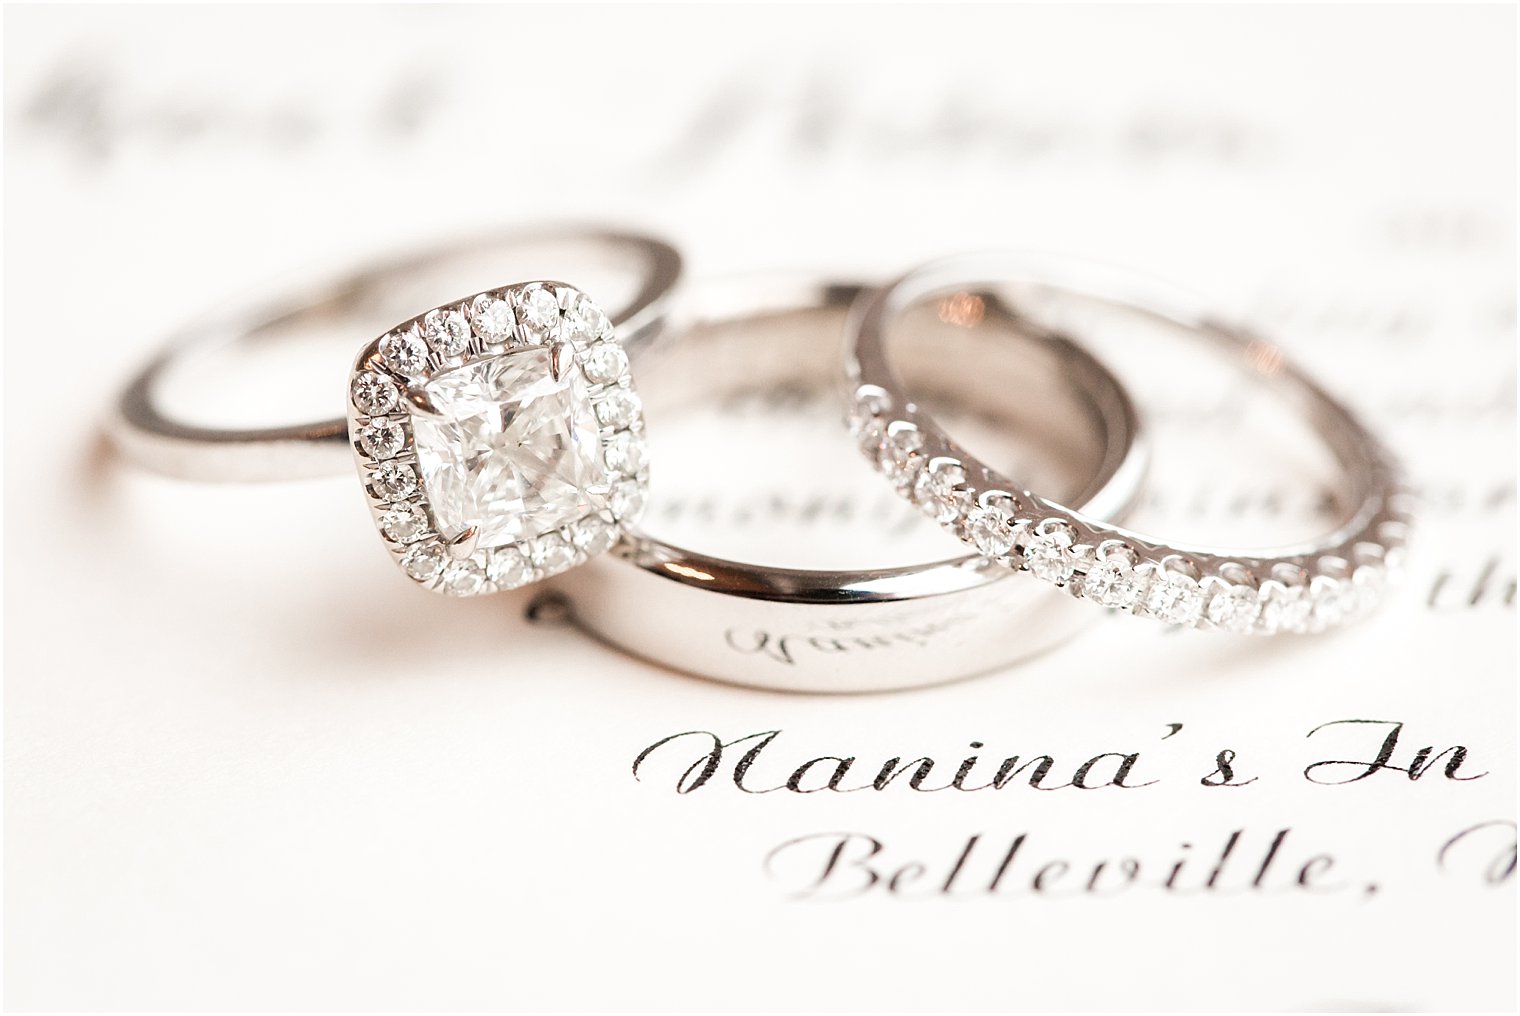 Classic wedding bands and engagement ring | Photo by Idalia Photography